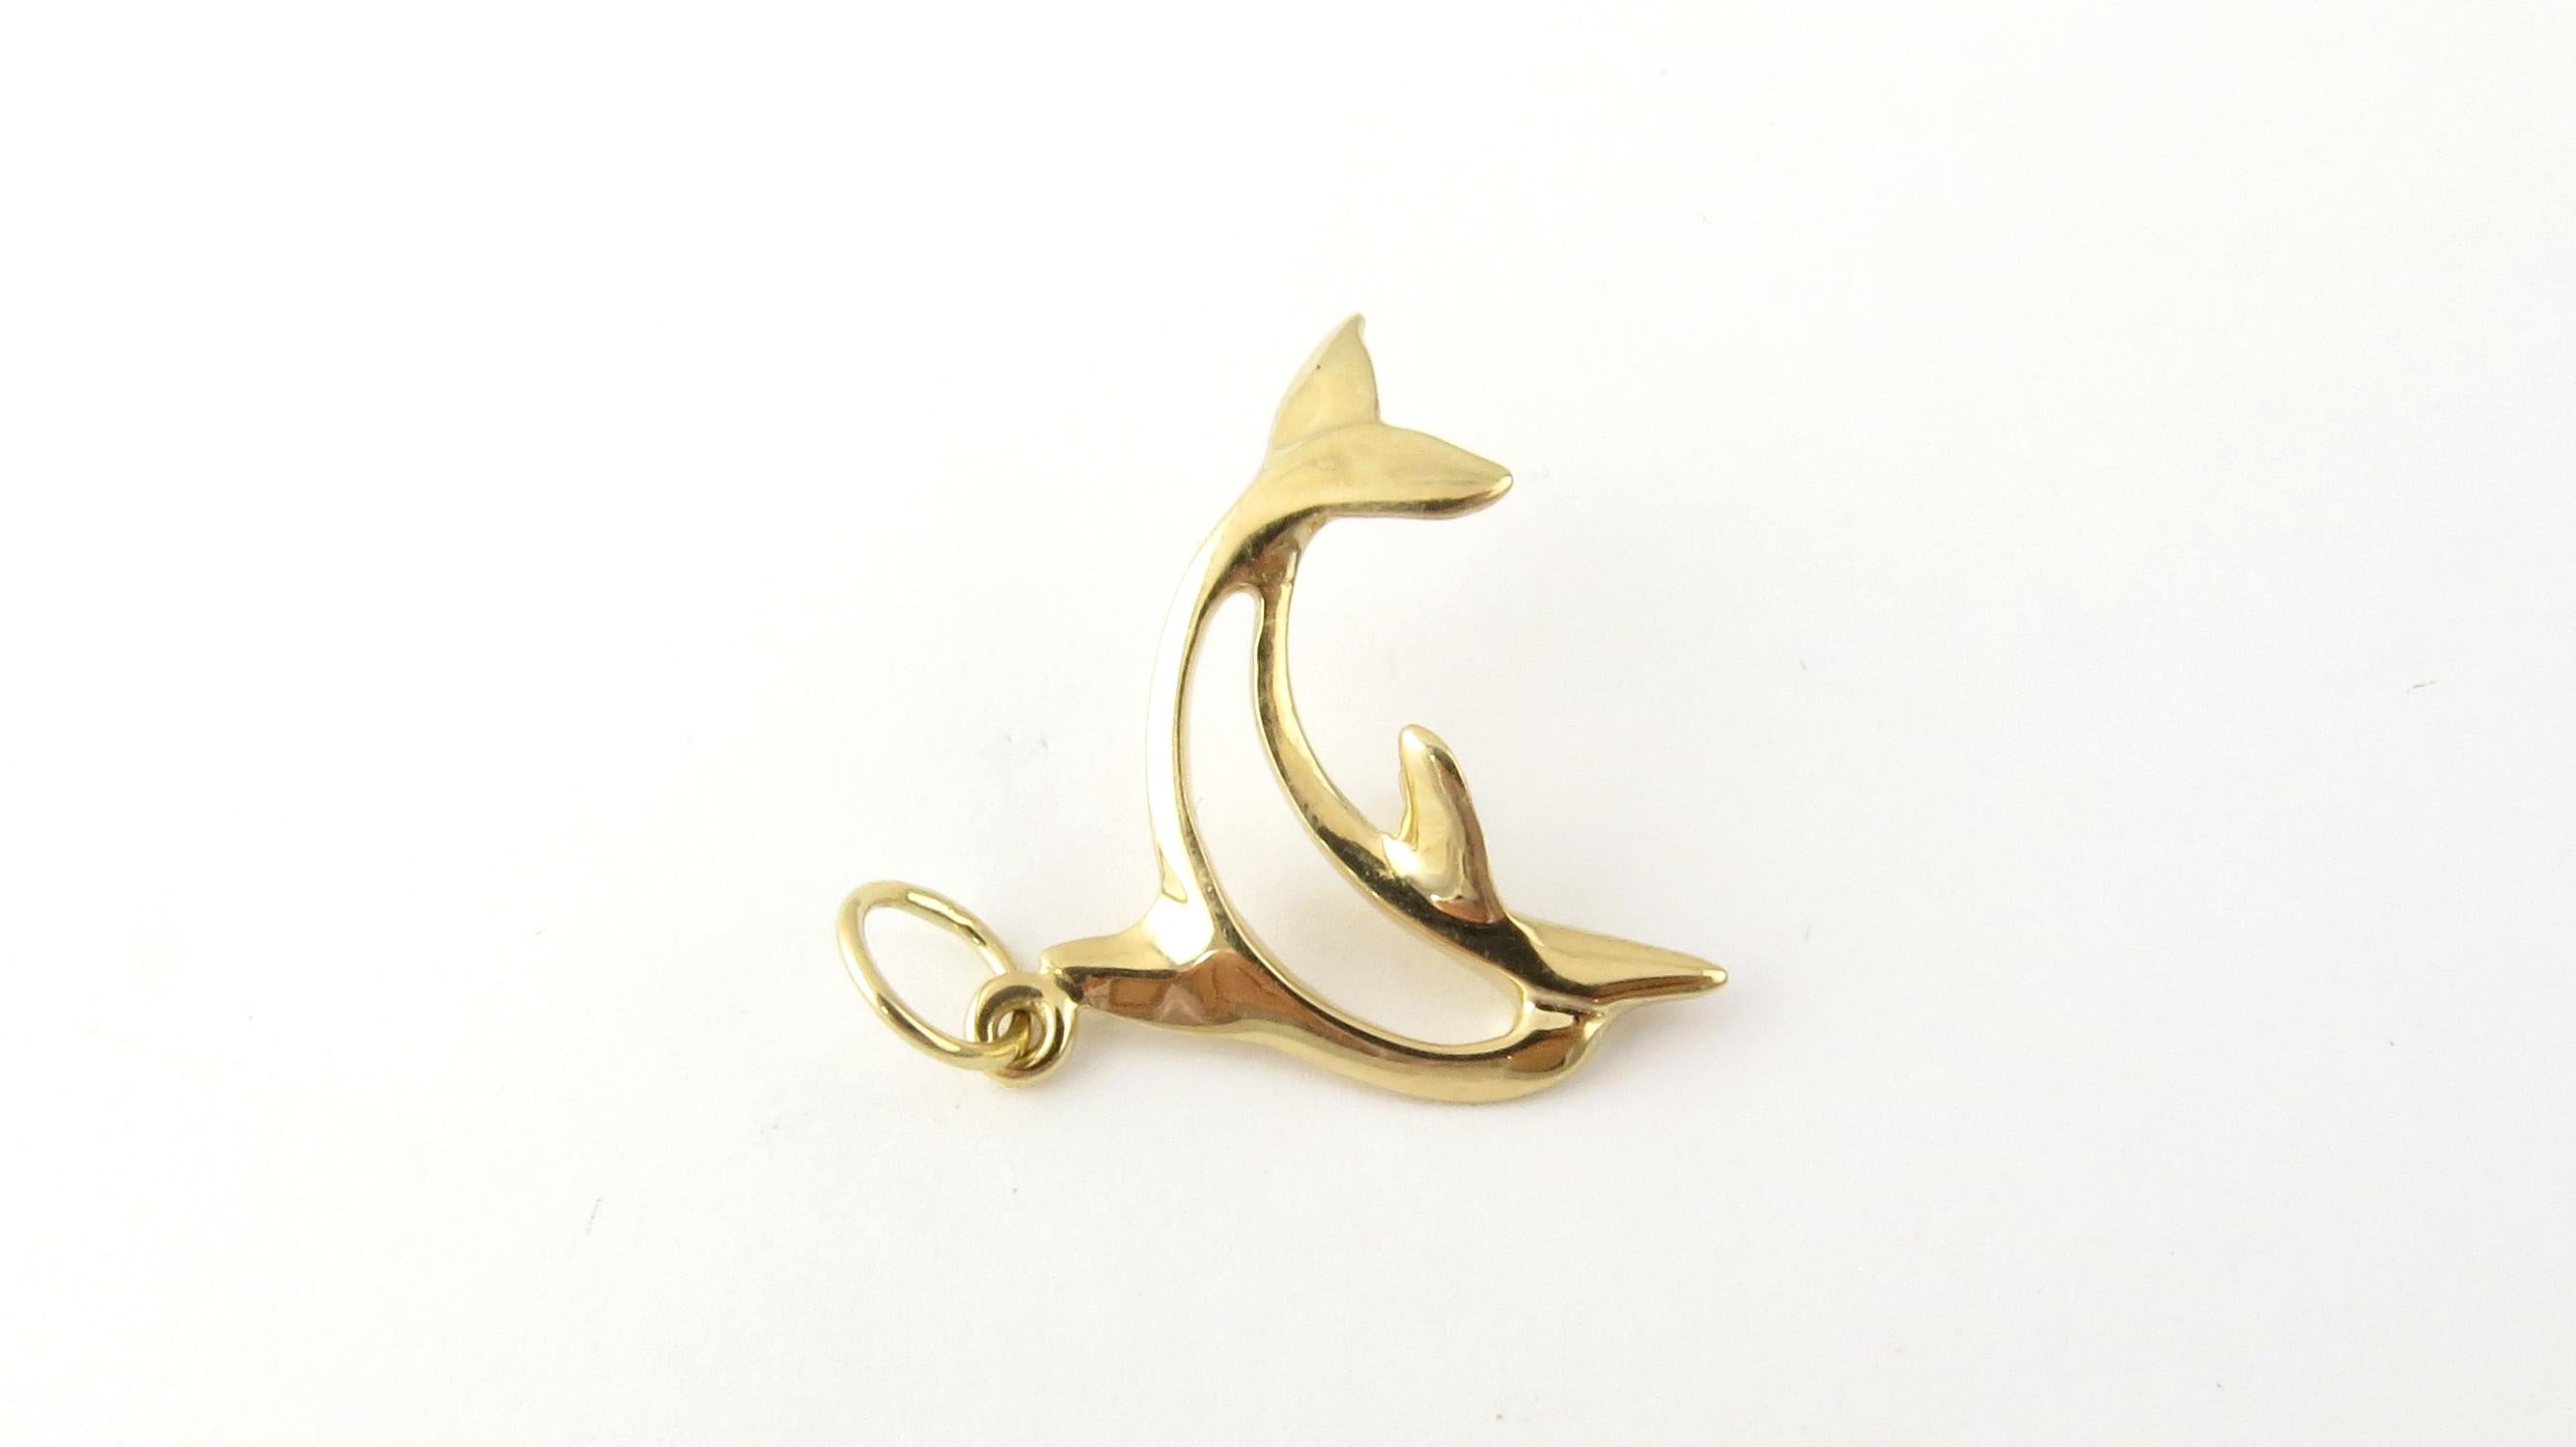 Vintage 14 Karat Yellow Gold Dolphin Charm

Dolphins have been a symbol of protection and good luck since ancient times.

This lovely charm features a beautiful dolphin meticulously detailed in an elegant open design.

Size: 22 mm x 22 mm (actual